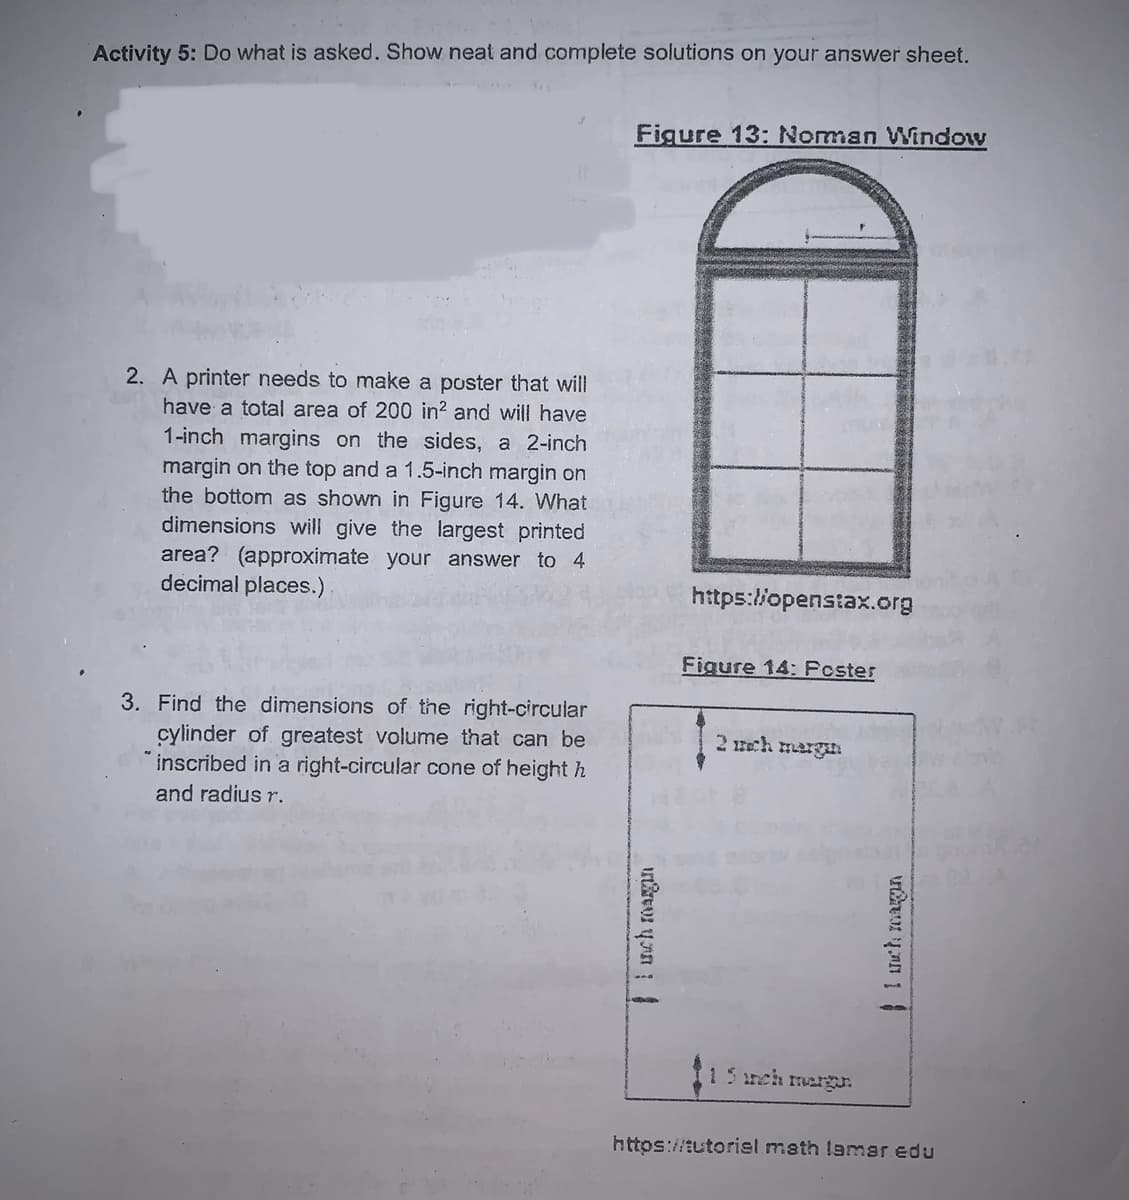 Activity 5: Do what is asked. Show neat and complete solutions on your answer sheet.
Figure 13: Noman Window
2. A printer needs to make a poster that will
have a total area of 200 in? and will have
1-inch margins on the sides, a 2-inch
margin on the top and a 1.5-inch margin on
the bottom as shown in Figure 14. What
dimensions will give the largest printed
area? (approximate your answer to 4
decimal places.)
https://openstax.org
Figure 14: Pcster
3. Find the dimensions of the right-circular
cylinder of greatest volume that can be
inscribed in a right-circular cone of height h
and radius r.
2 ech mergan
15reh mergJ.
https://tutoriel math lamar edu
1 nch magan
